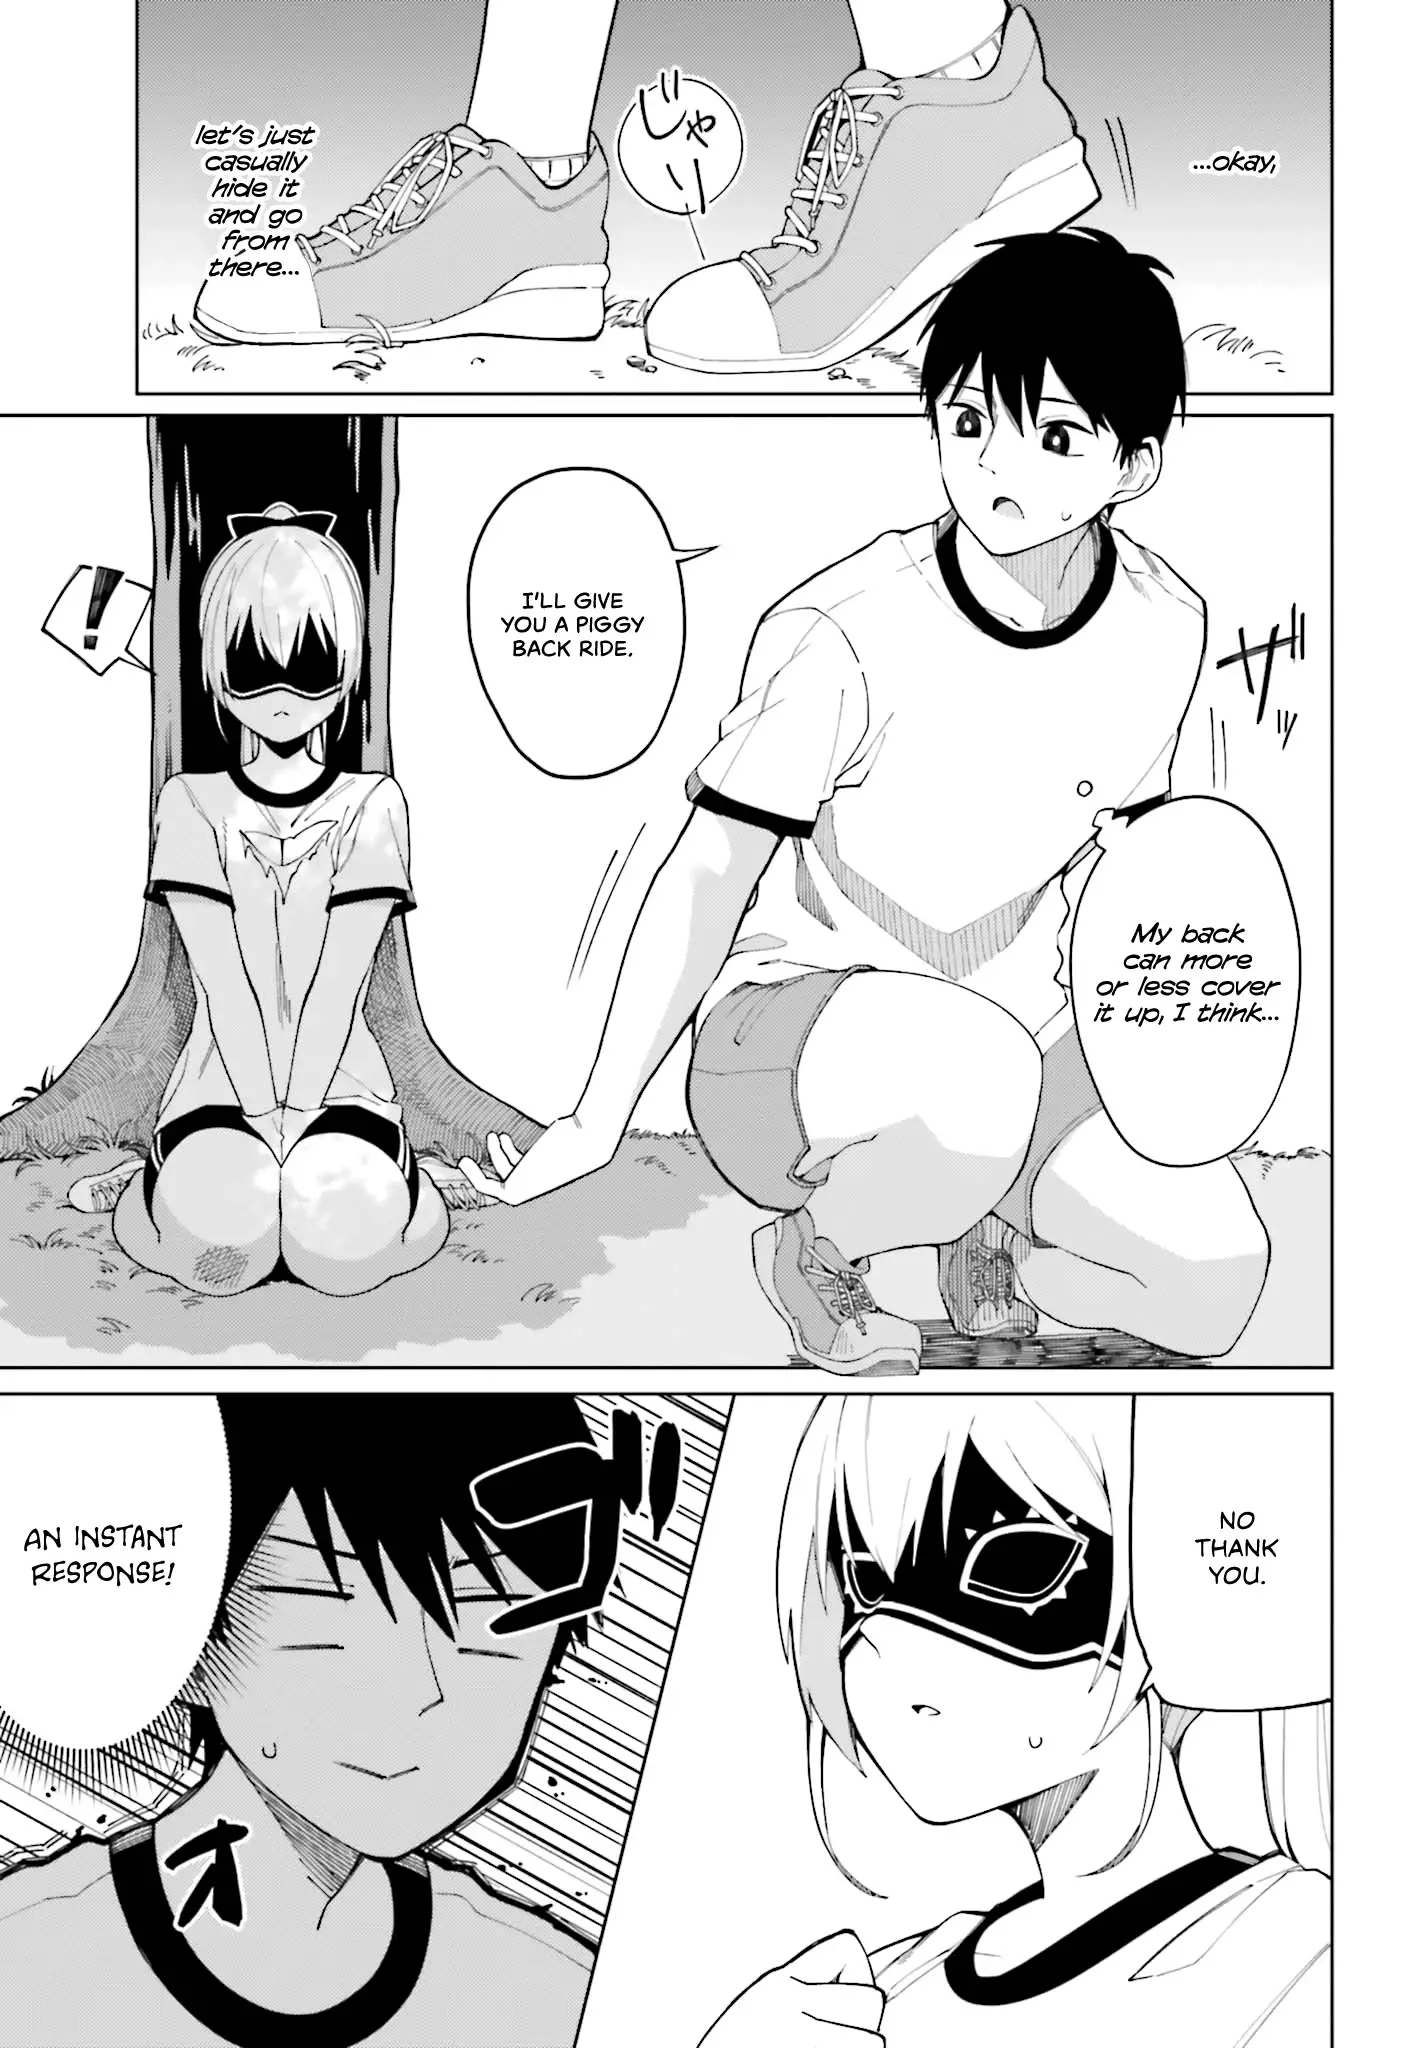 I Don't Understand Shirogane-San's Facial Expression At All - 2 page 11